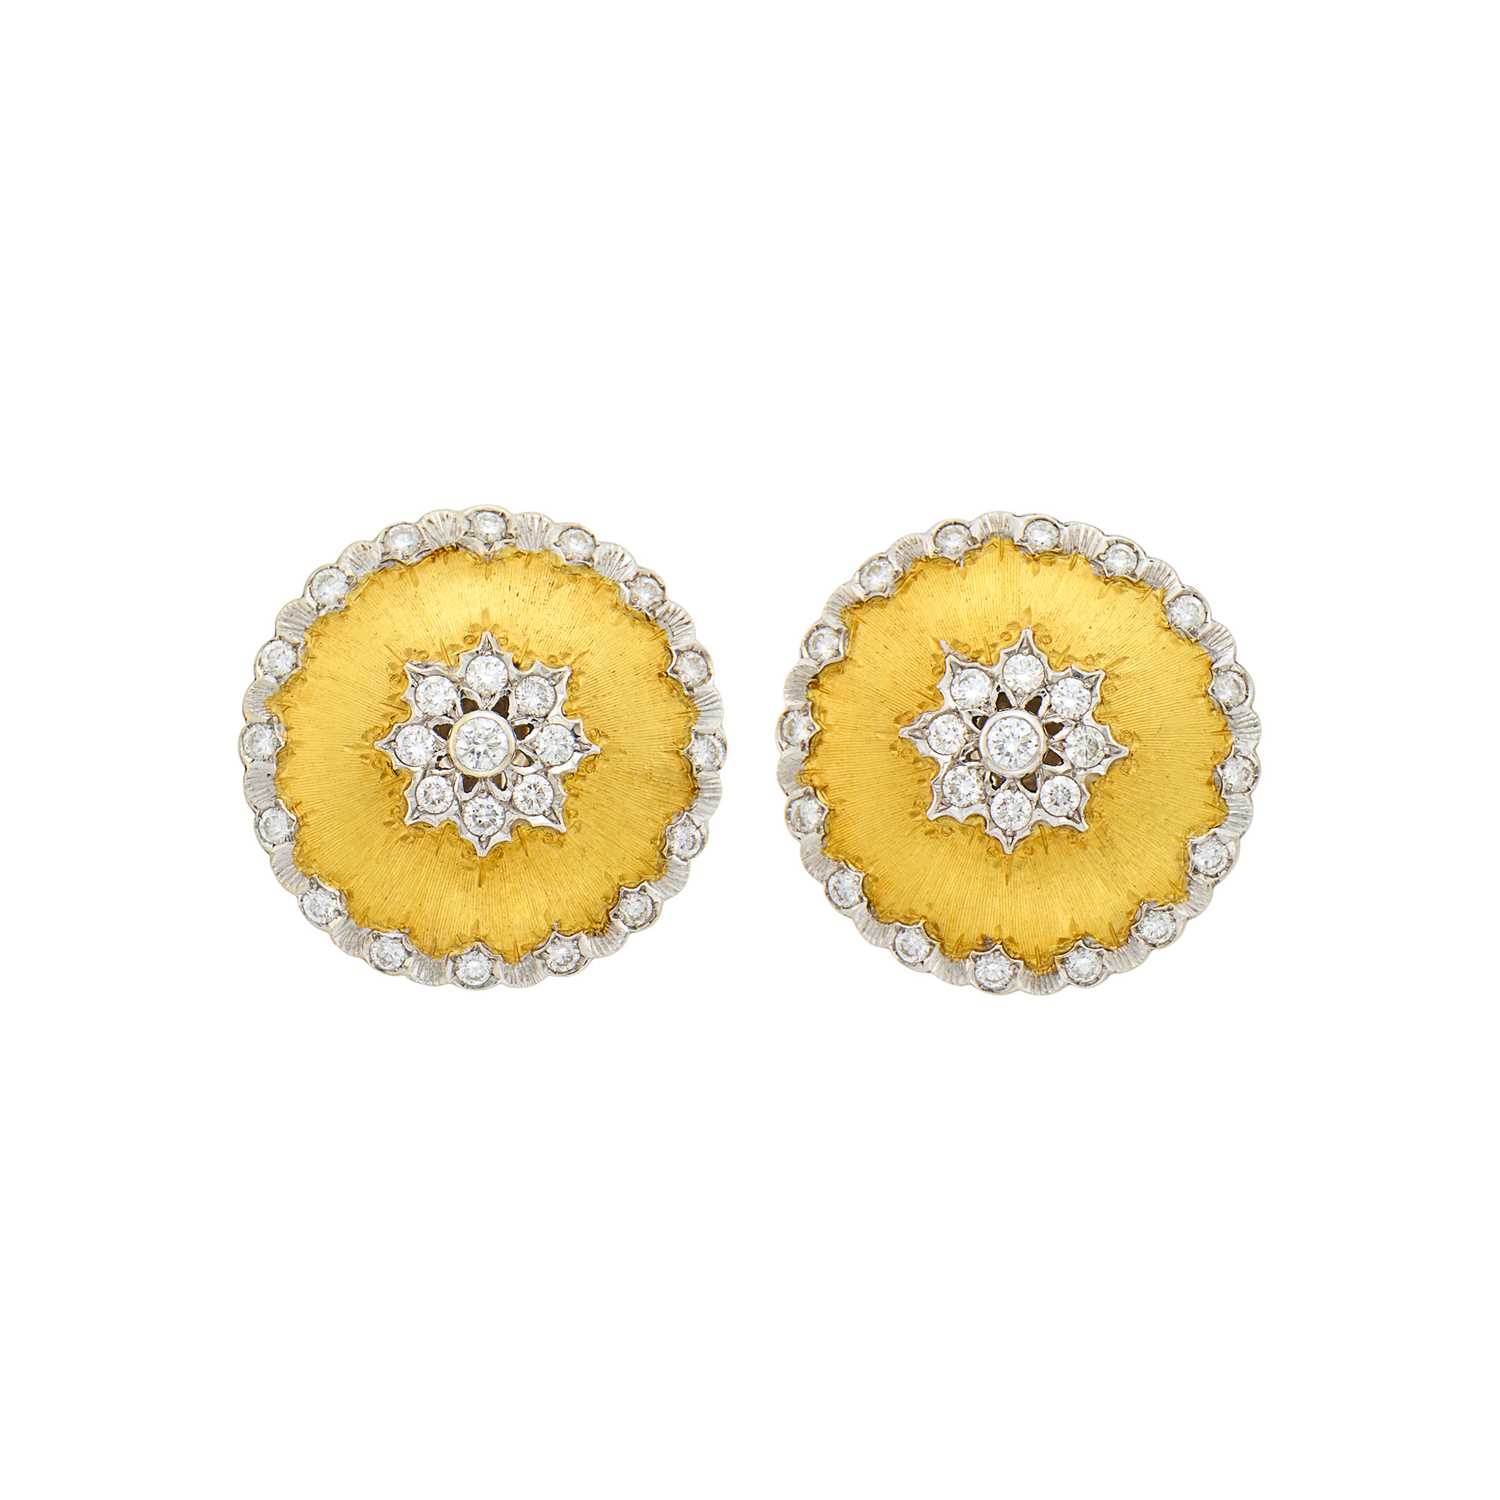 Lot 2045 - Pair of Two-Color Gold and Diamond Earrings